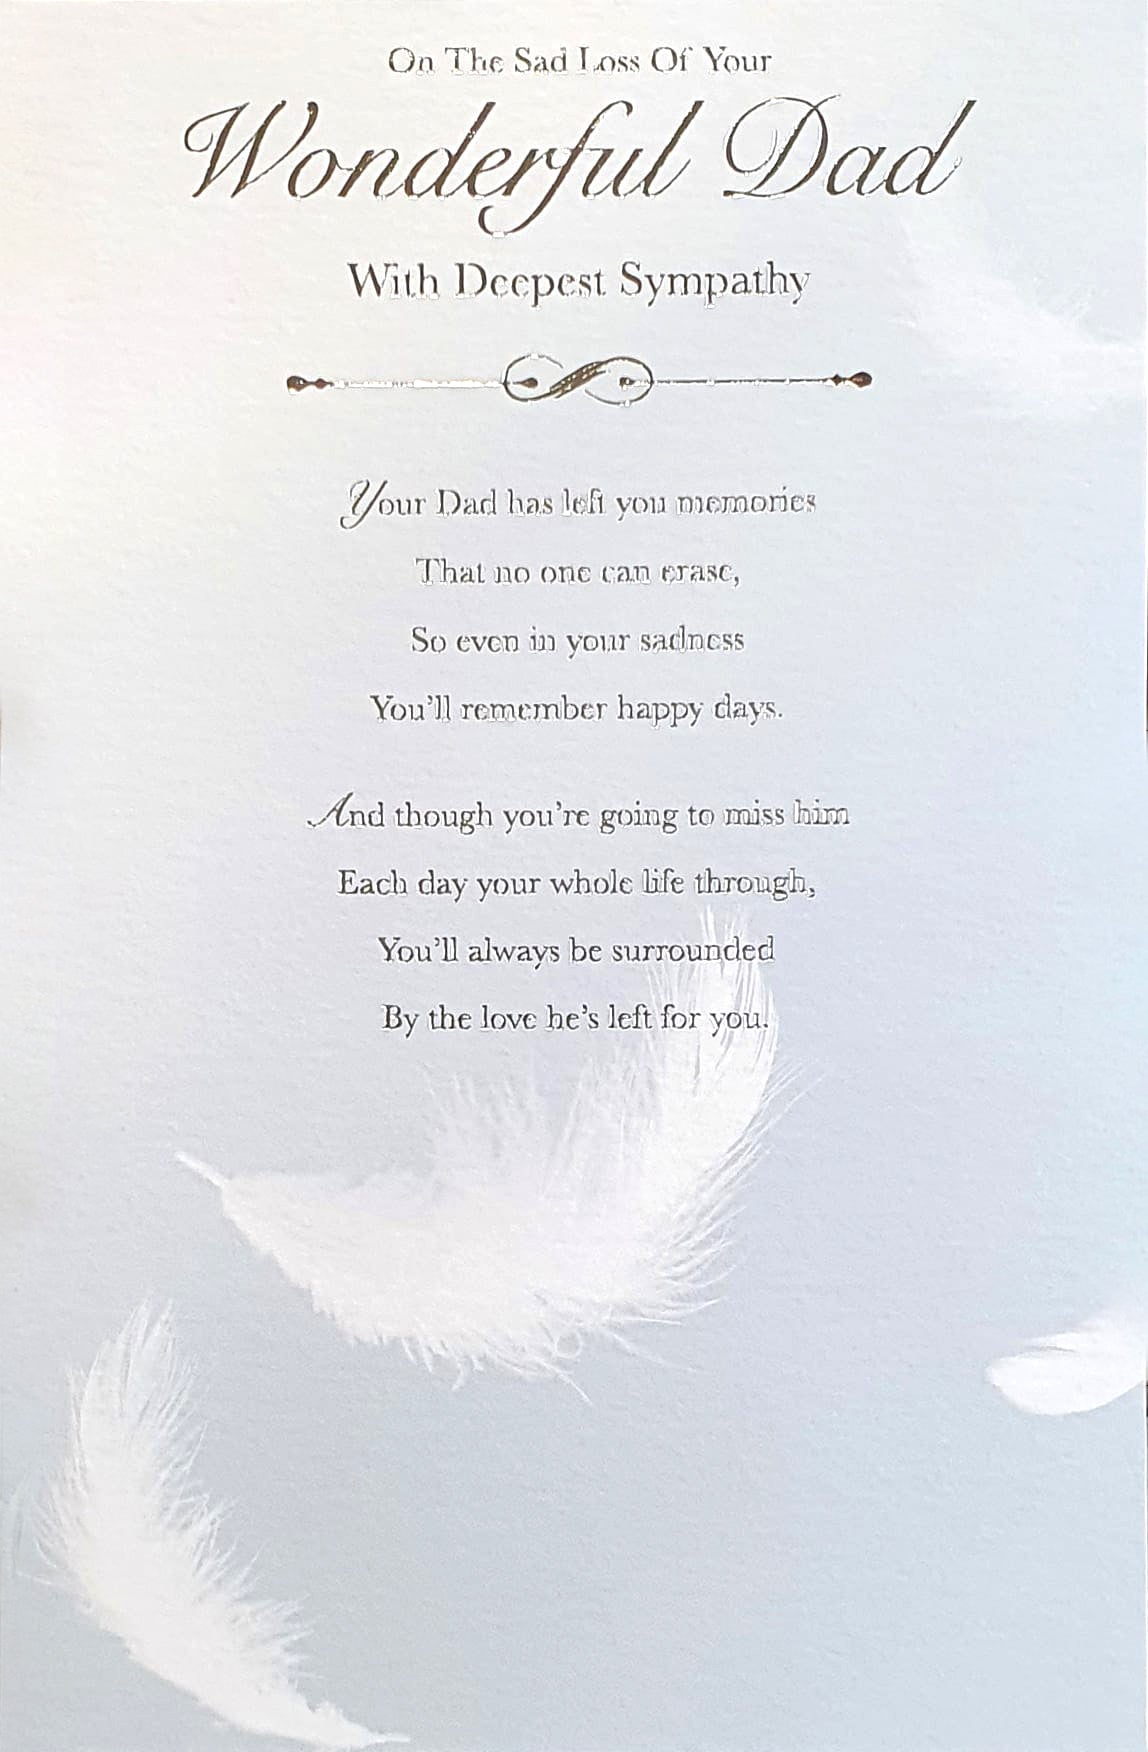 Sympathy Card - On The Sad Loss Of Your Wonderful Dad